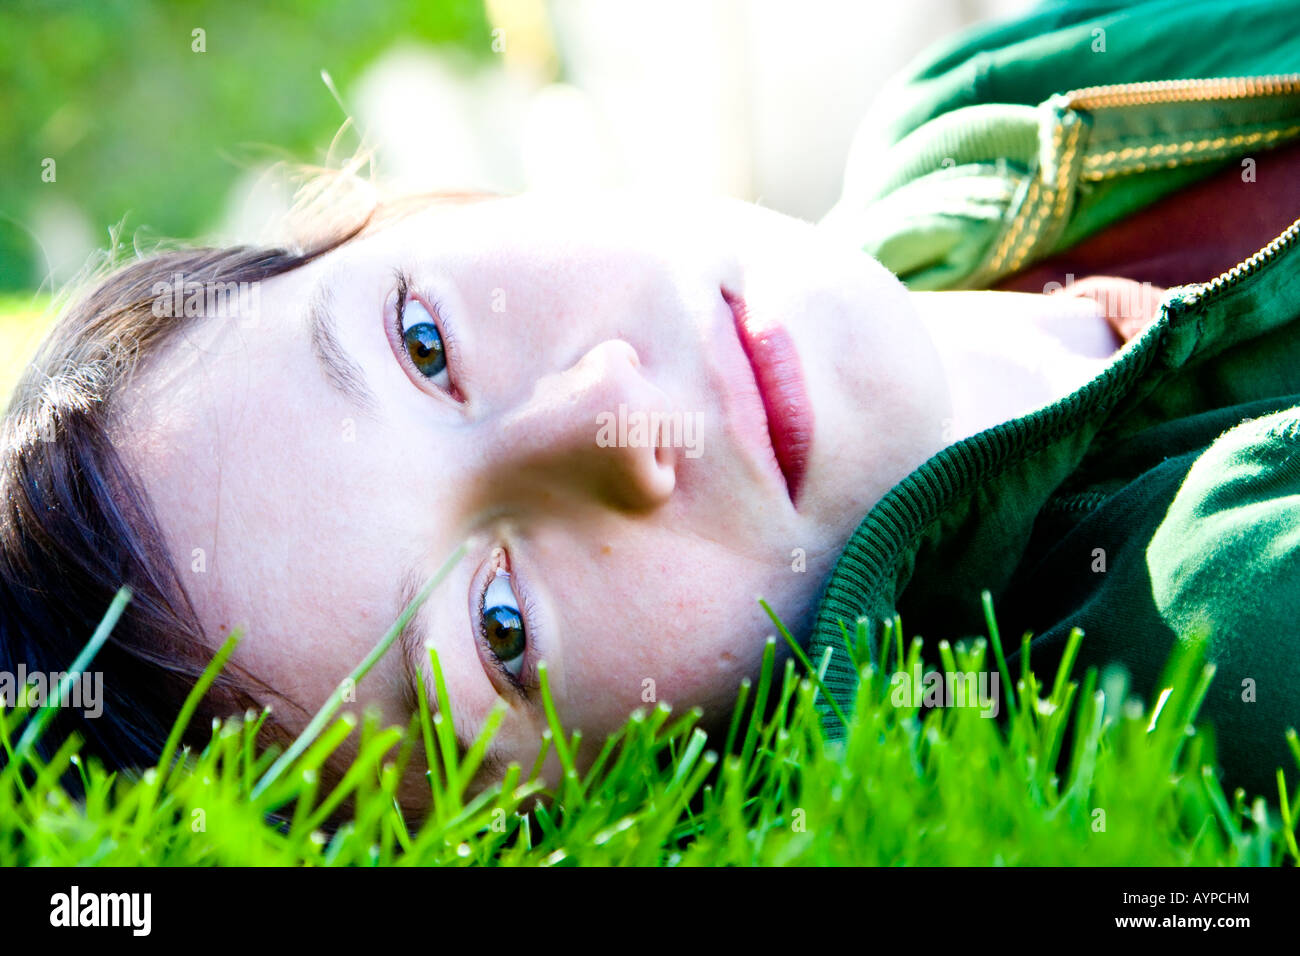 Young woman staring at camera in the grass Stock Photo